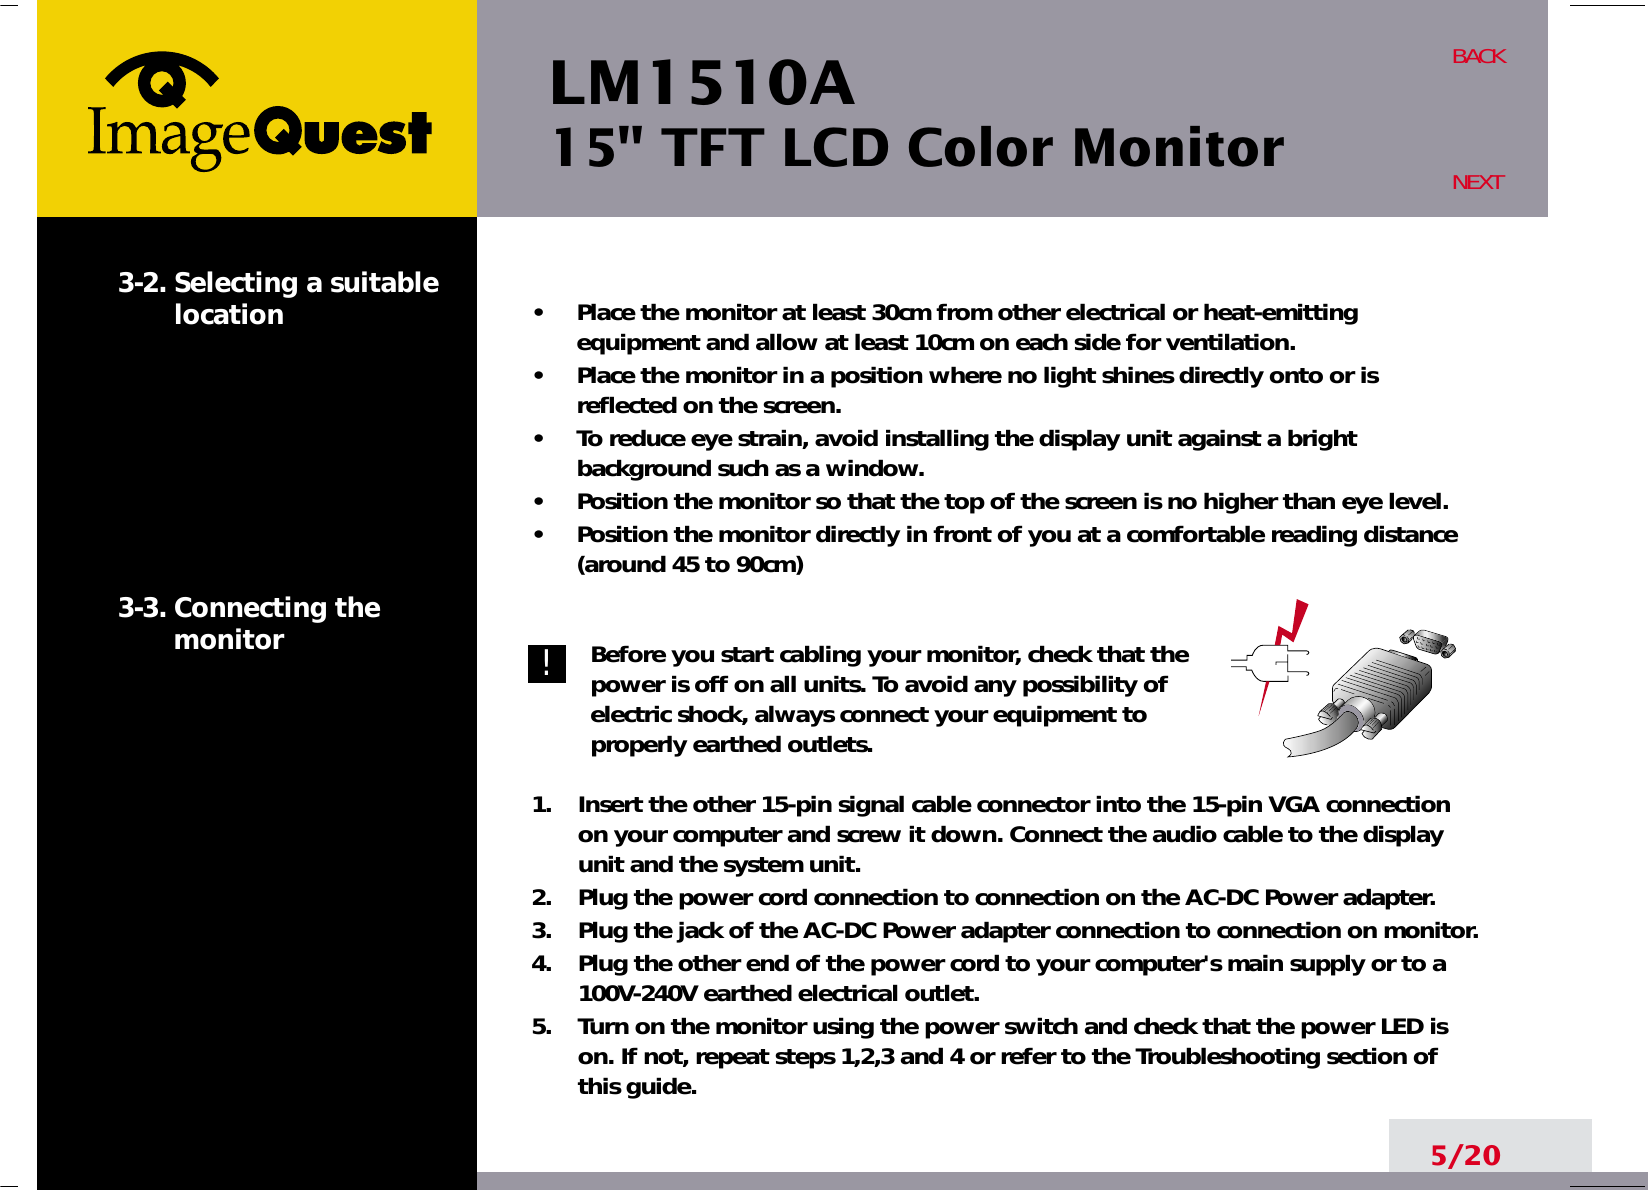 LM1510A15&quot; TFT LCD Color Monitor5/20BACKNEXT3-2. Selecting a suitablelocation3-3. Connecting the monitor•     Place the monitor at least 30cm from other electrical or heat-emittingequipment and allow at least 10cm on each side for ventilation.•     Place the monitor in a position where no light shines directly onto or isreflected on the screen.•     To reduce eye strain, avoid installing the display unit against a brightbackground such as a window.•     Position the monitor so that the top of the screen is no higher than eye level.•     Position the monitor directly in front of you at a comfortable reading distance(around 45 to 90cm) Before you start cabling your monitor, check that thepower is off on all units. To avoid any possibility ofelectric shock, always connect your equipment toproperly earthed outlets.1.    Insert the other 15-pin signal cable connector into the 15-pin VGA connectionon your computer and screw it down. Connect the audio cable to the displayunit and the system unit.2.    Plug the power cord connection to connection on the AC-DC Power adapter.3.    Plug the jack of the AC-DC Power adapter connection to connection on monitor.4.    Plug the other end of the power cord to your computer&apos;s main supply or to a100V-240V earthed electrical outlet.5.    Turn on the monitor using the power switch and check that the power LED ison. If not, repeat steps 1,2,3 and 4 or refer to the Troubleshooting section ofthis guide.!